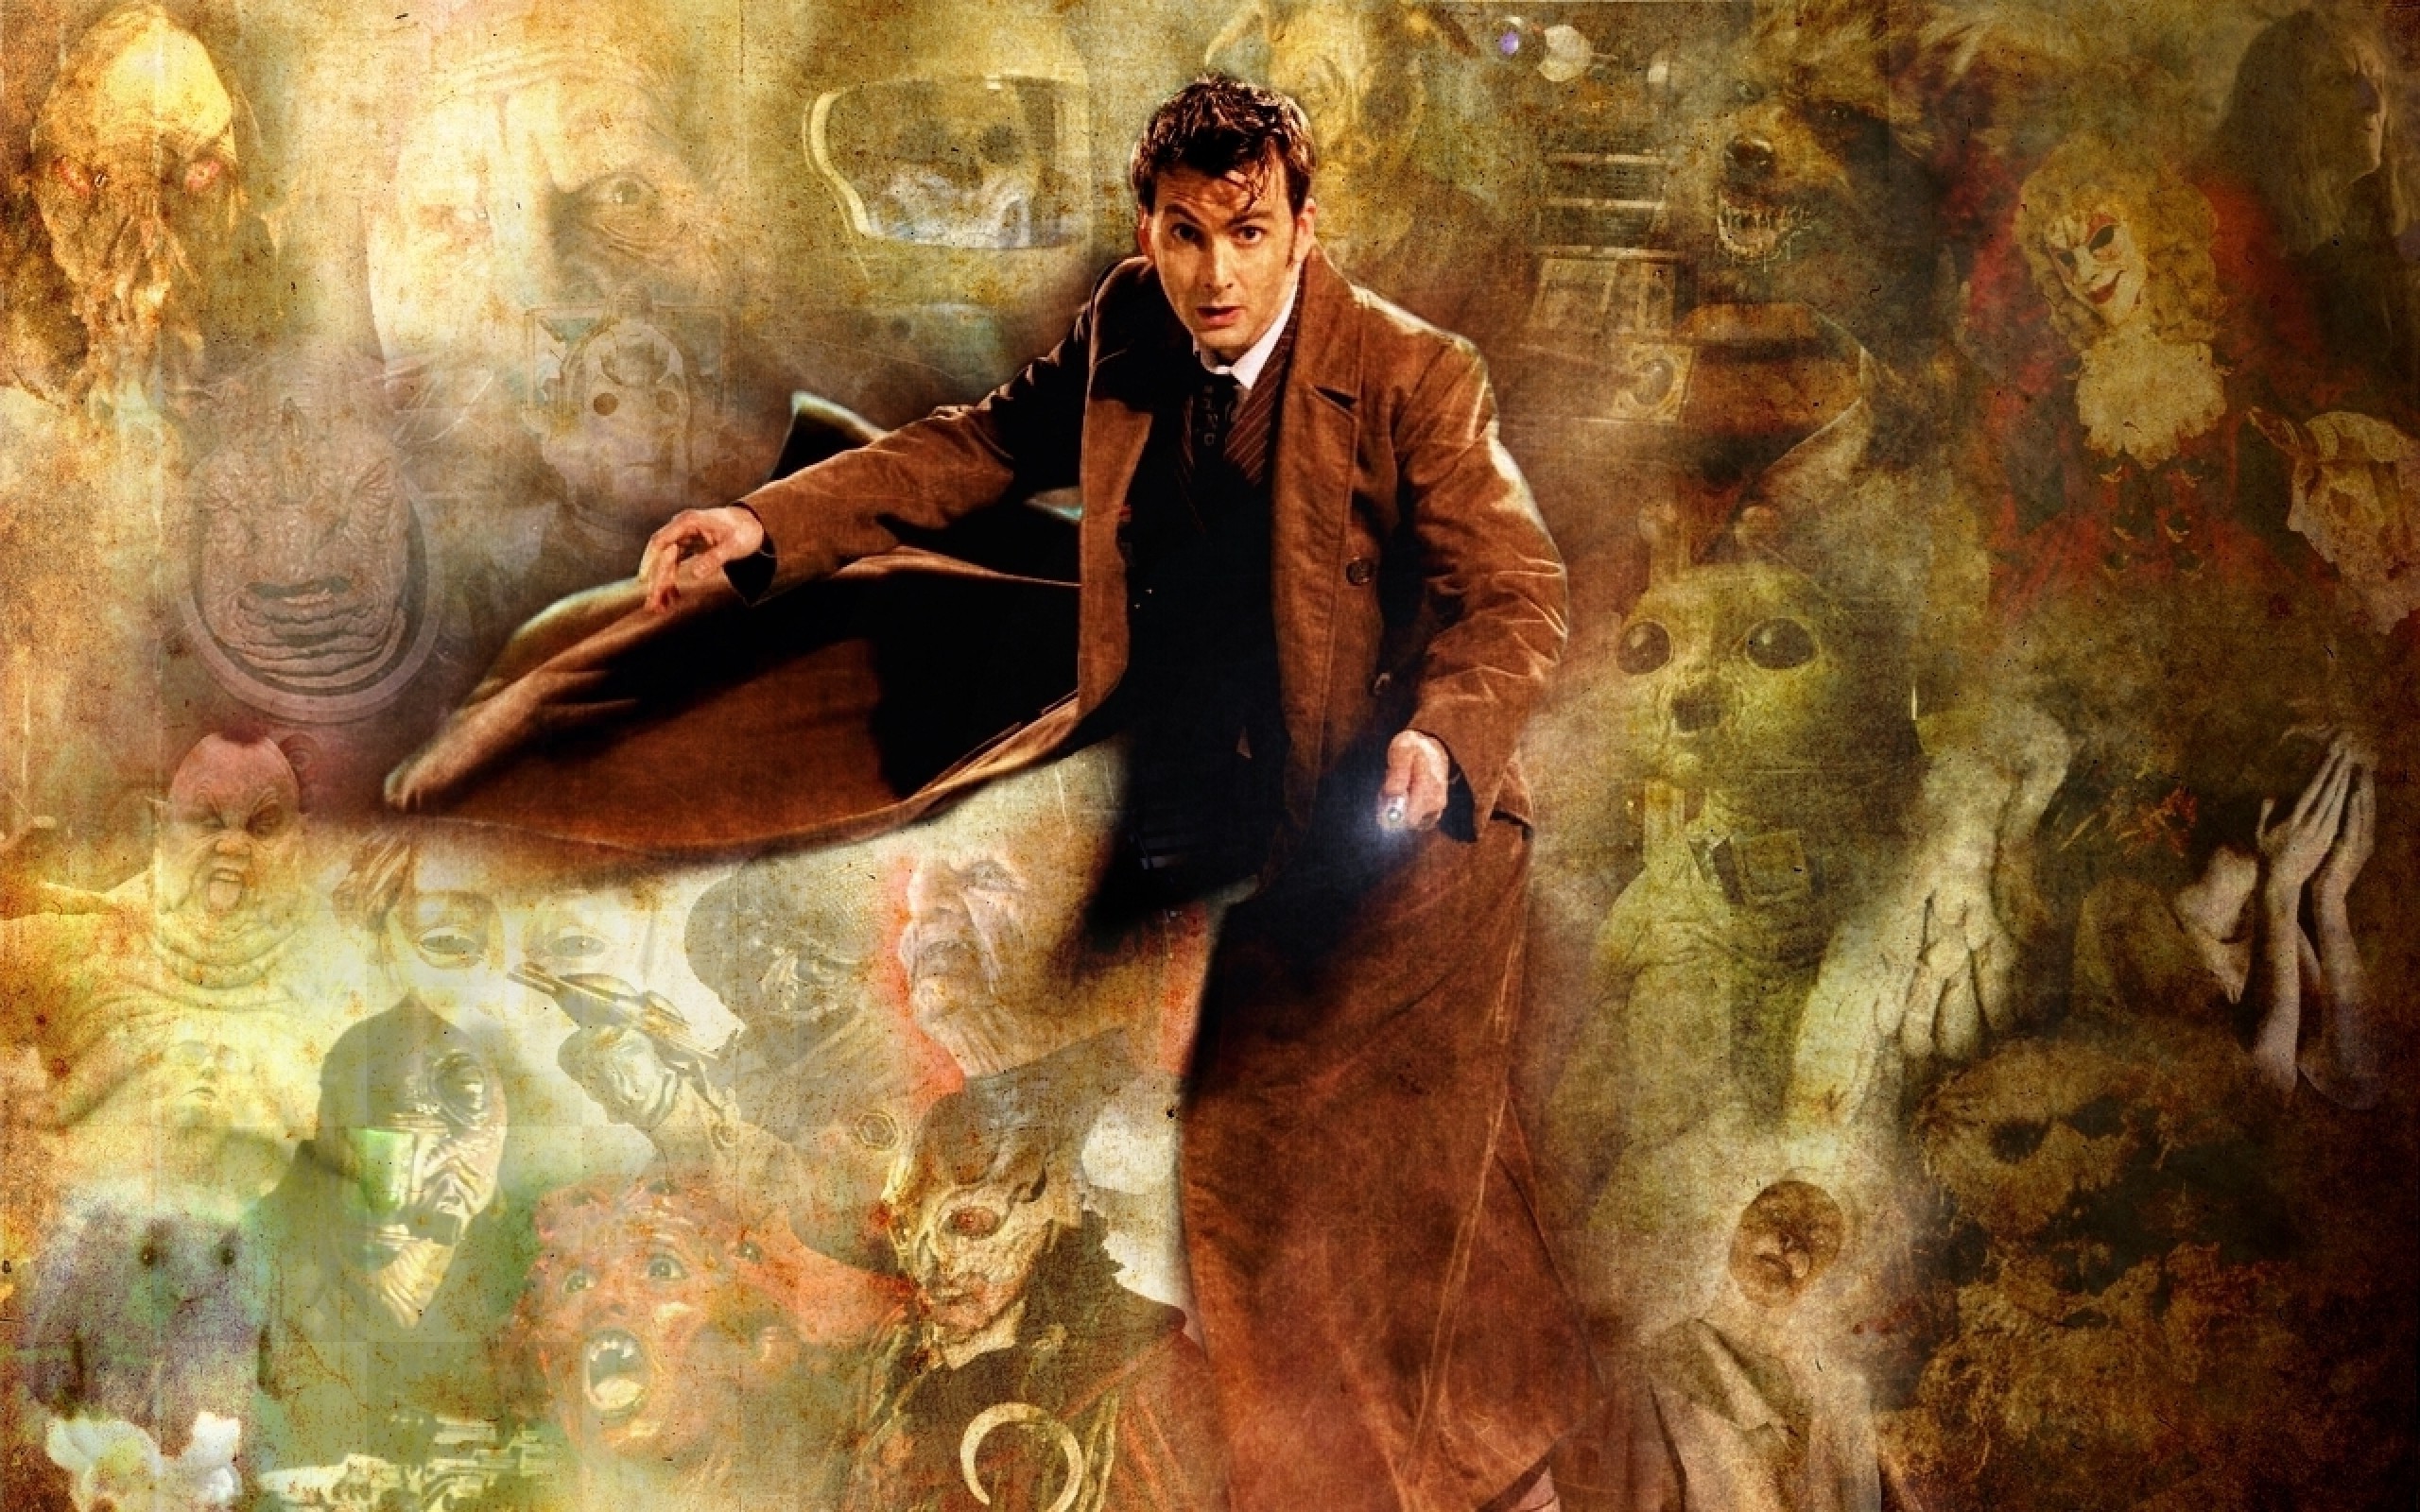 X doctor who the doctor tardis david tennant tenth doctor